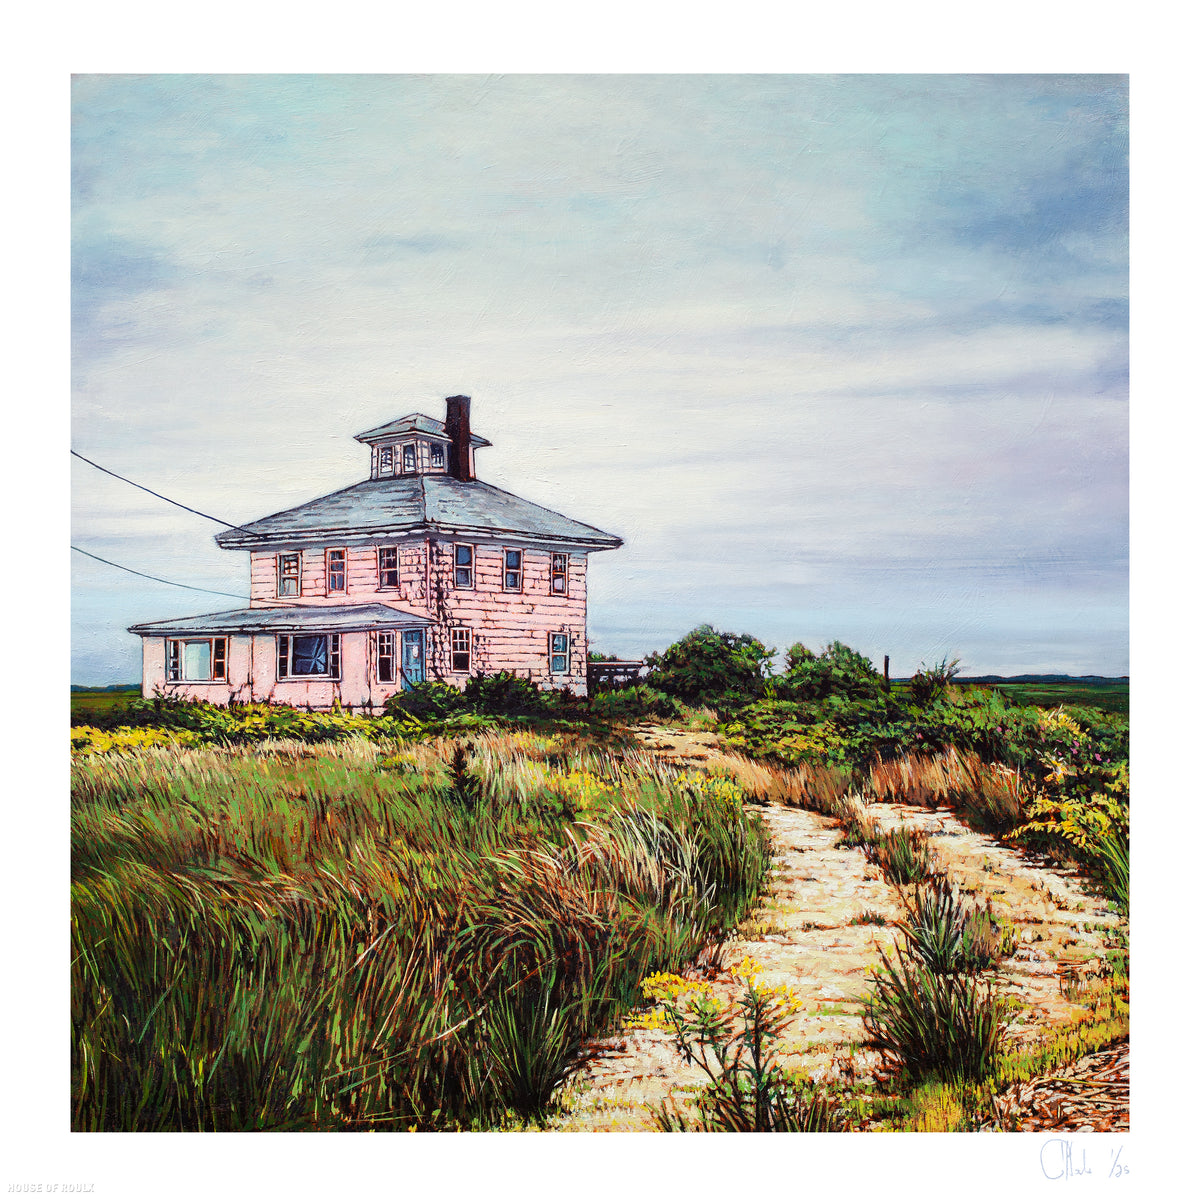 Andrew Houle &quot;The Pink House&quot; - Archival Print, Limited Edition of 25 - 17 x 17&quot;